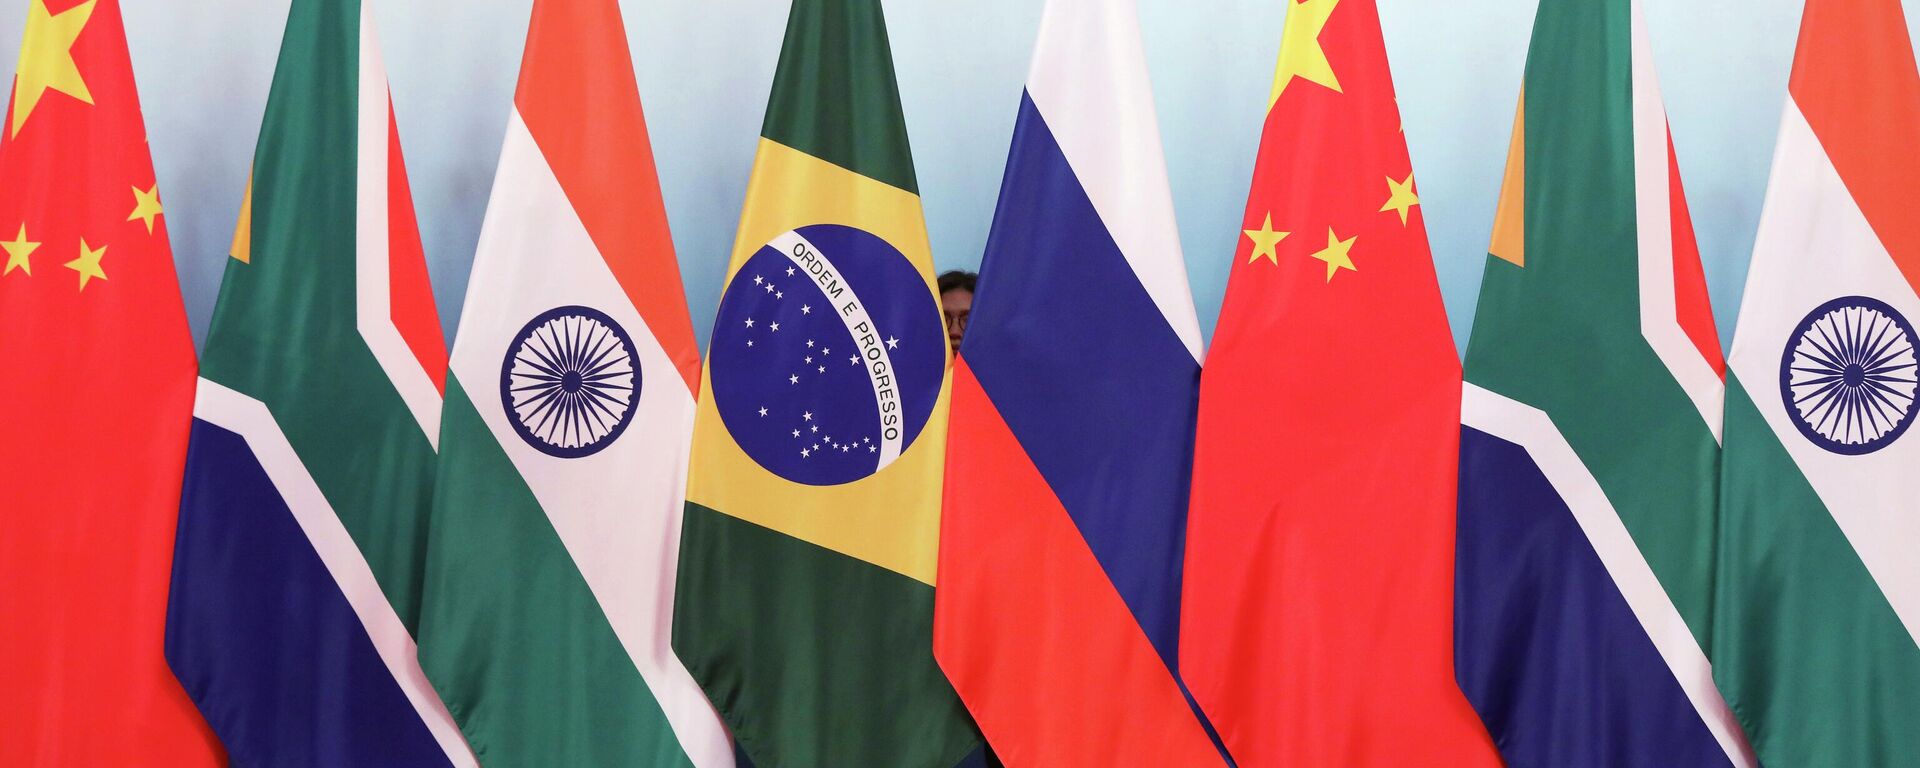 Staff worker stands behind national flags of Brazil, Russia, China, South Africa and India to tidy the flags ahead of a group photo during the BRICS Summit at the Xiamen International Conference and Exhibition Center in Xiamen, southeastern China's Fujian Province, Monday, Sept. 4, 2017. - Sputnik International, 1920, 18.01.2023